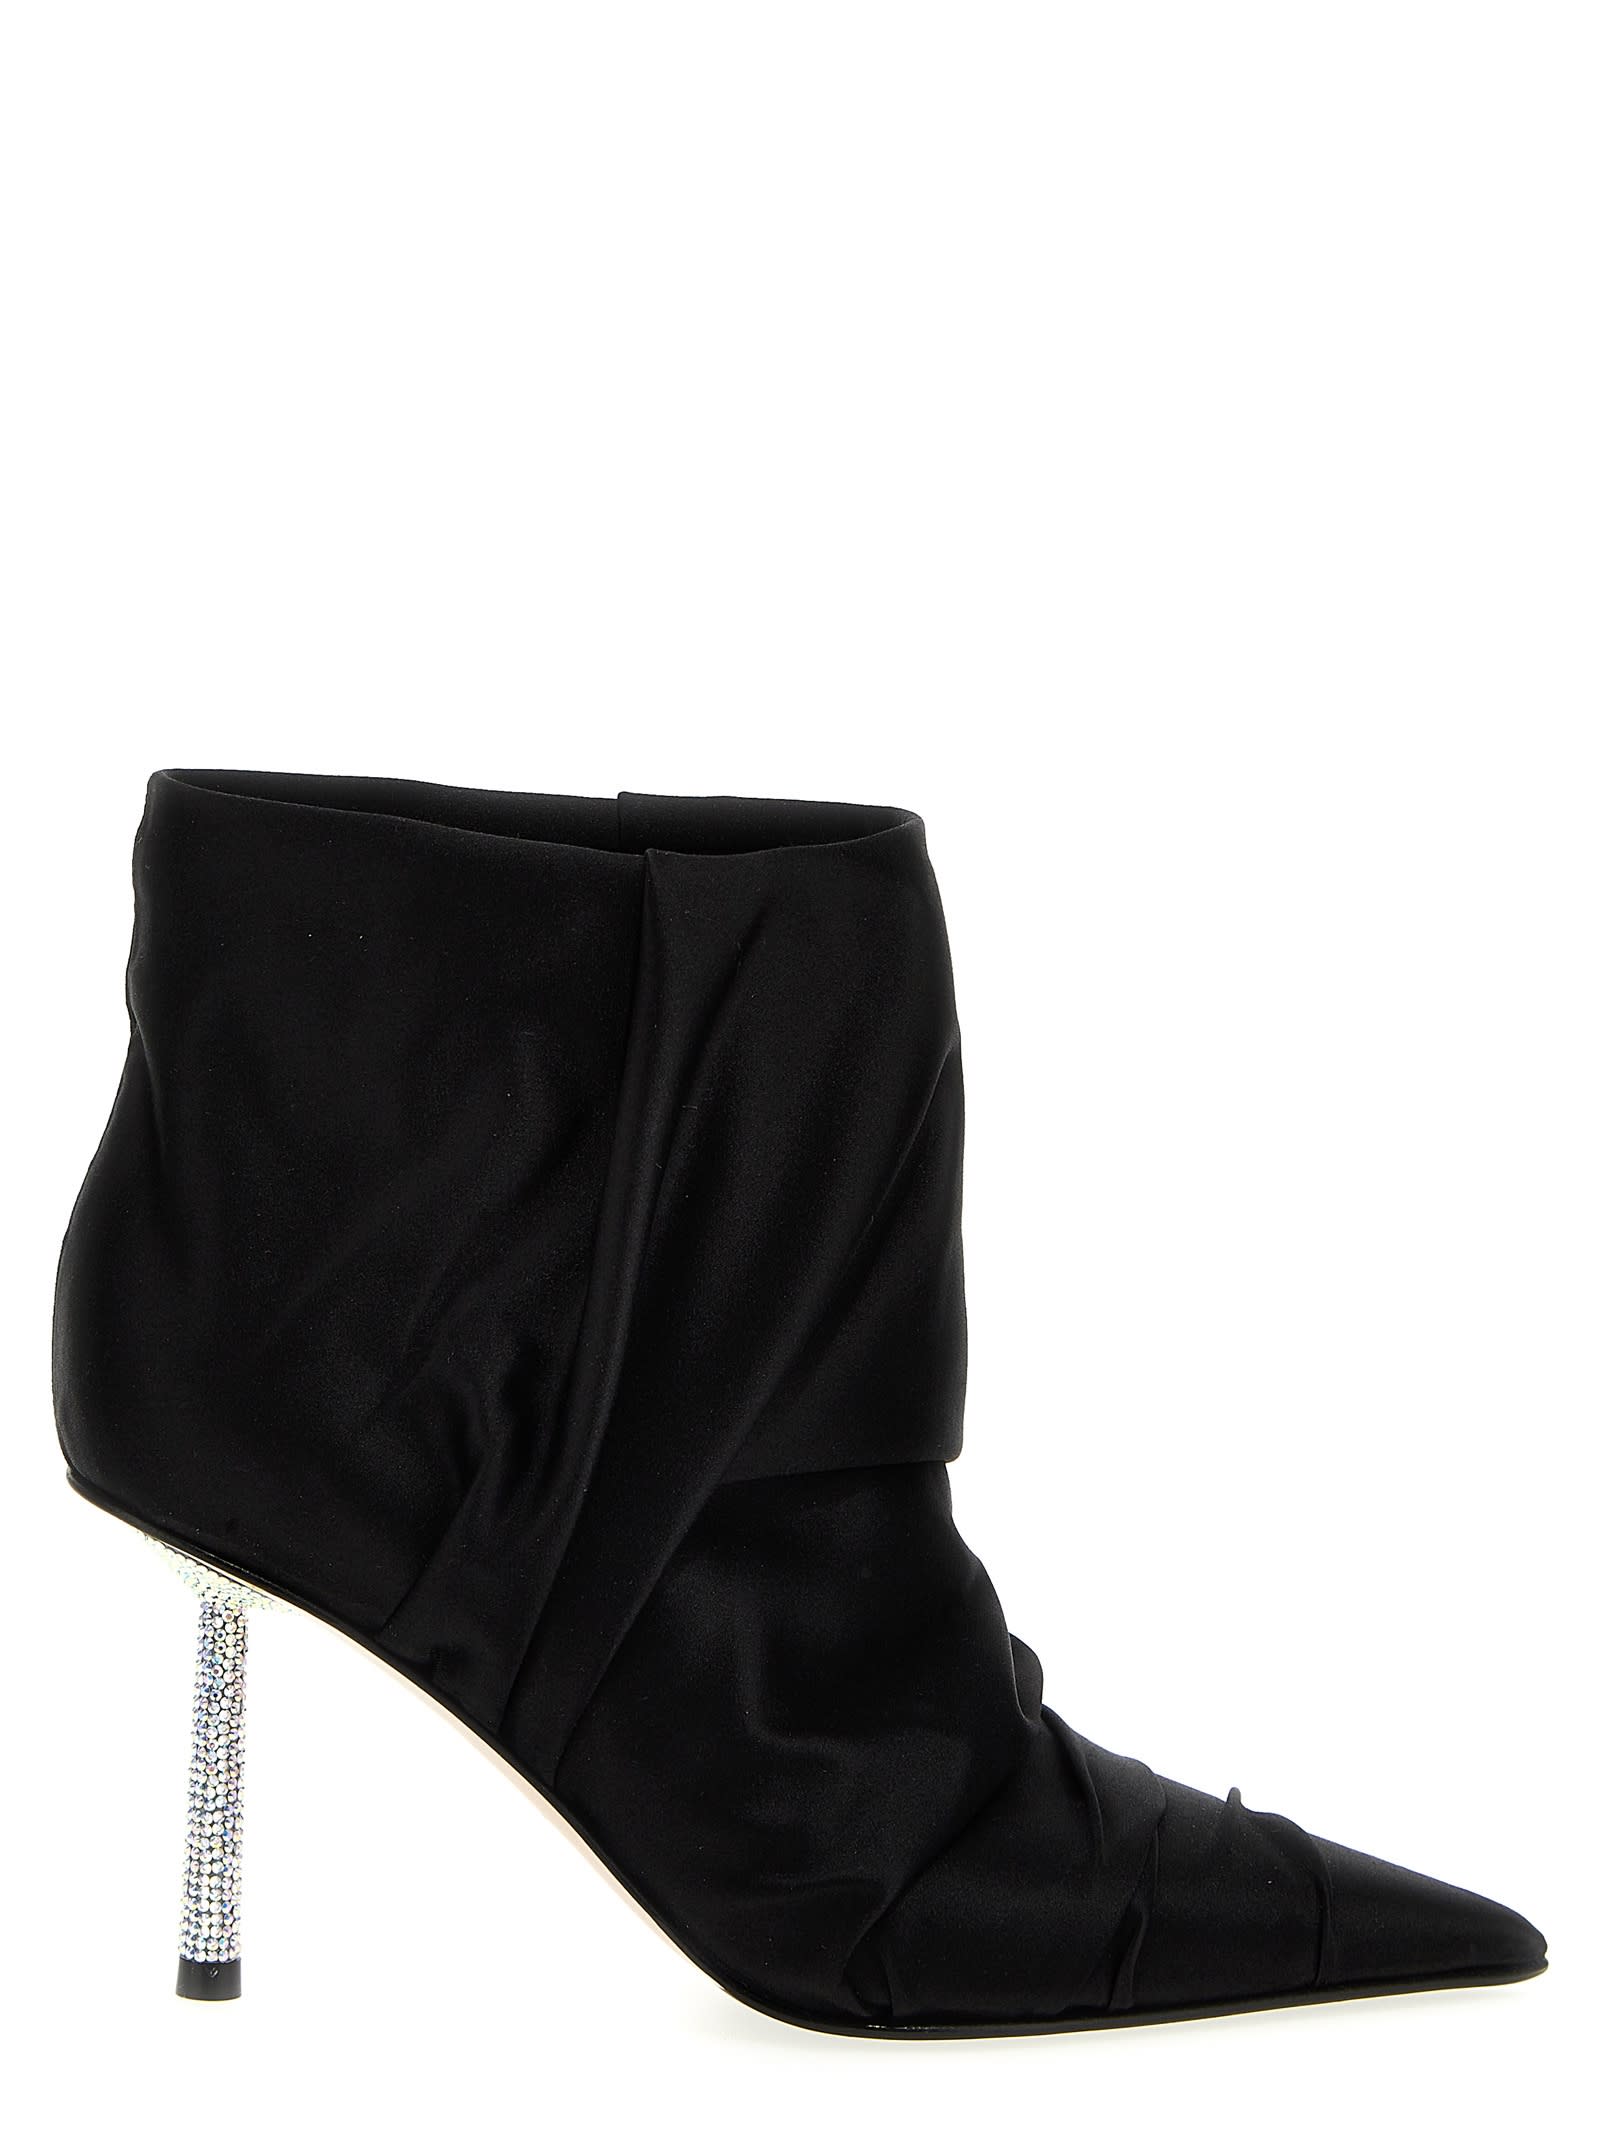 LE SILLA FEDRA ANKLE BOOTS